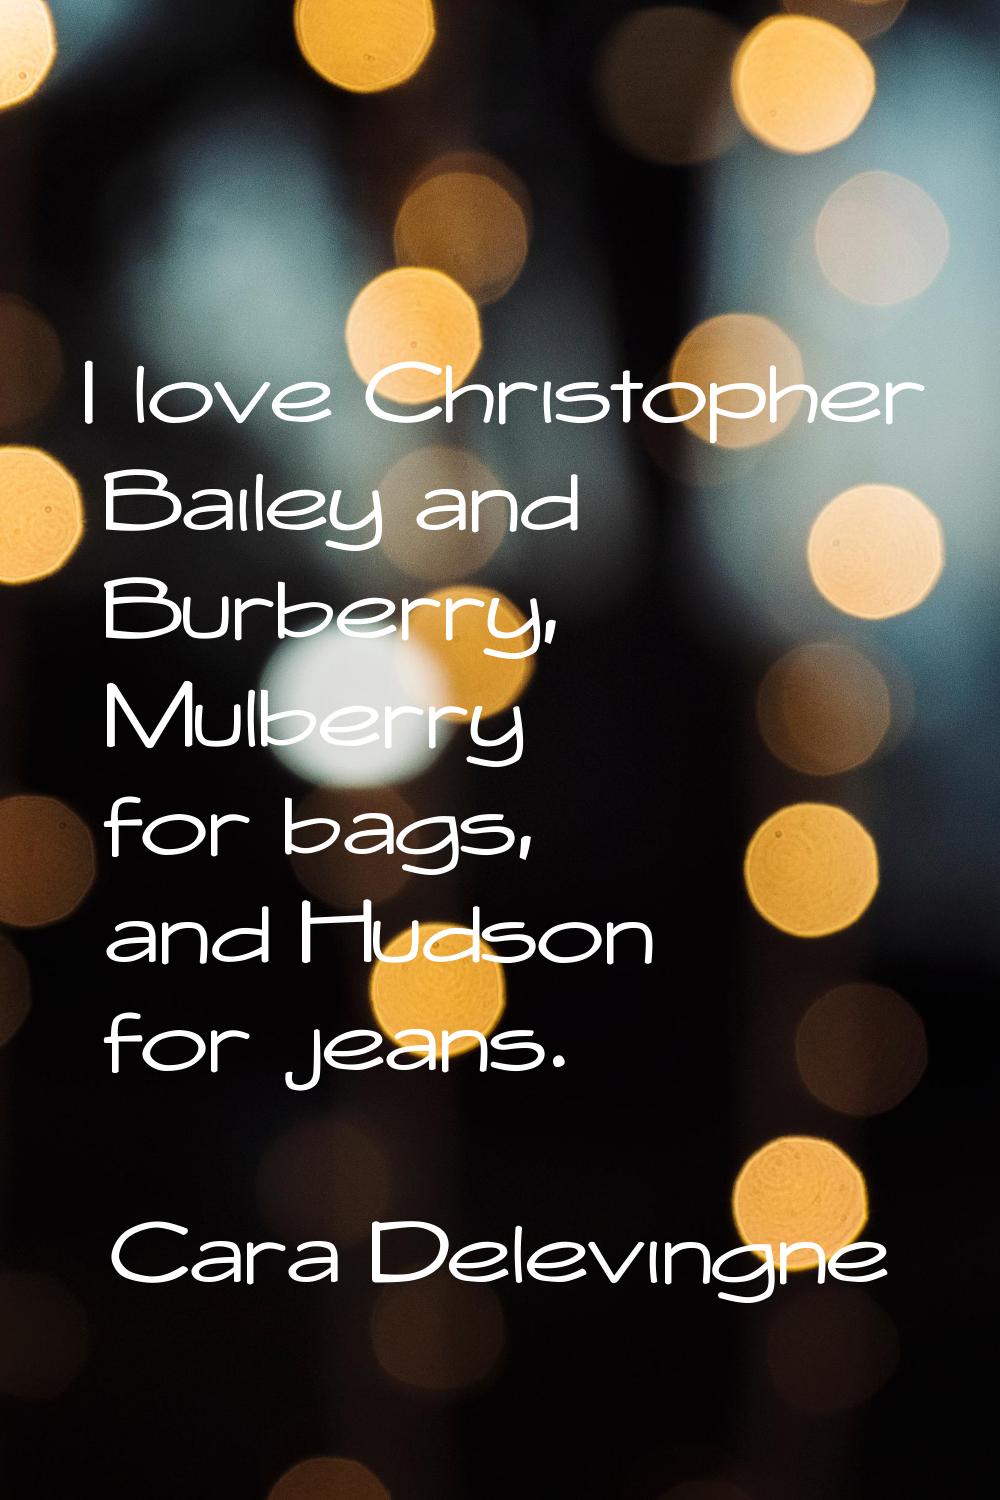 I love Christopher Bailey and Burberry, Mulberry for bags, and Hudson for jeans.